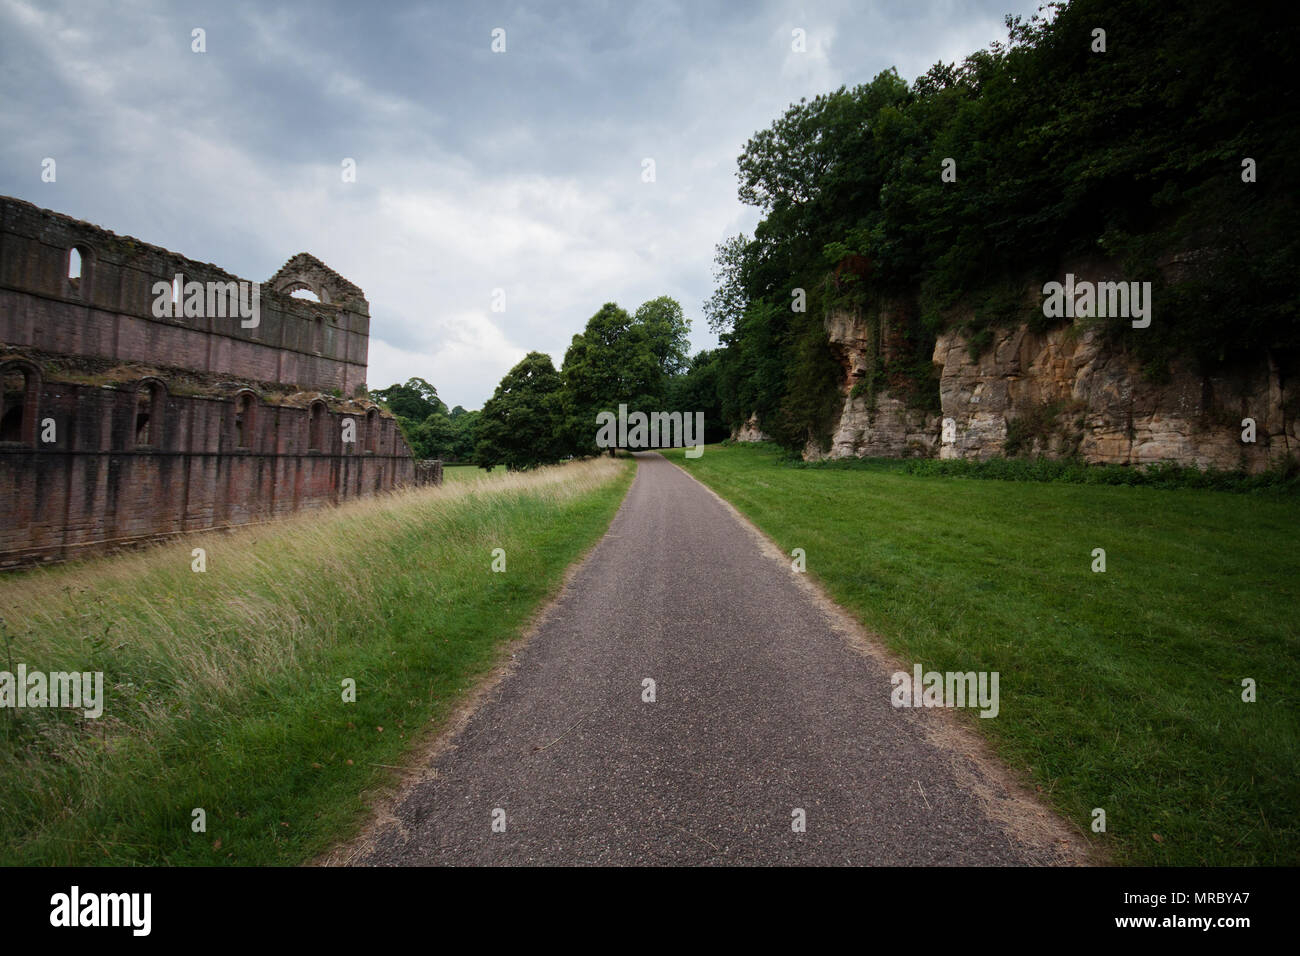 Paved walking path in Fountains Abbey, Ripon, UK Stock Photo